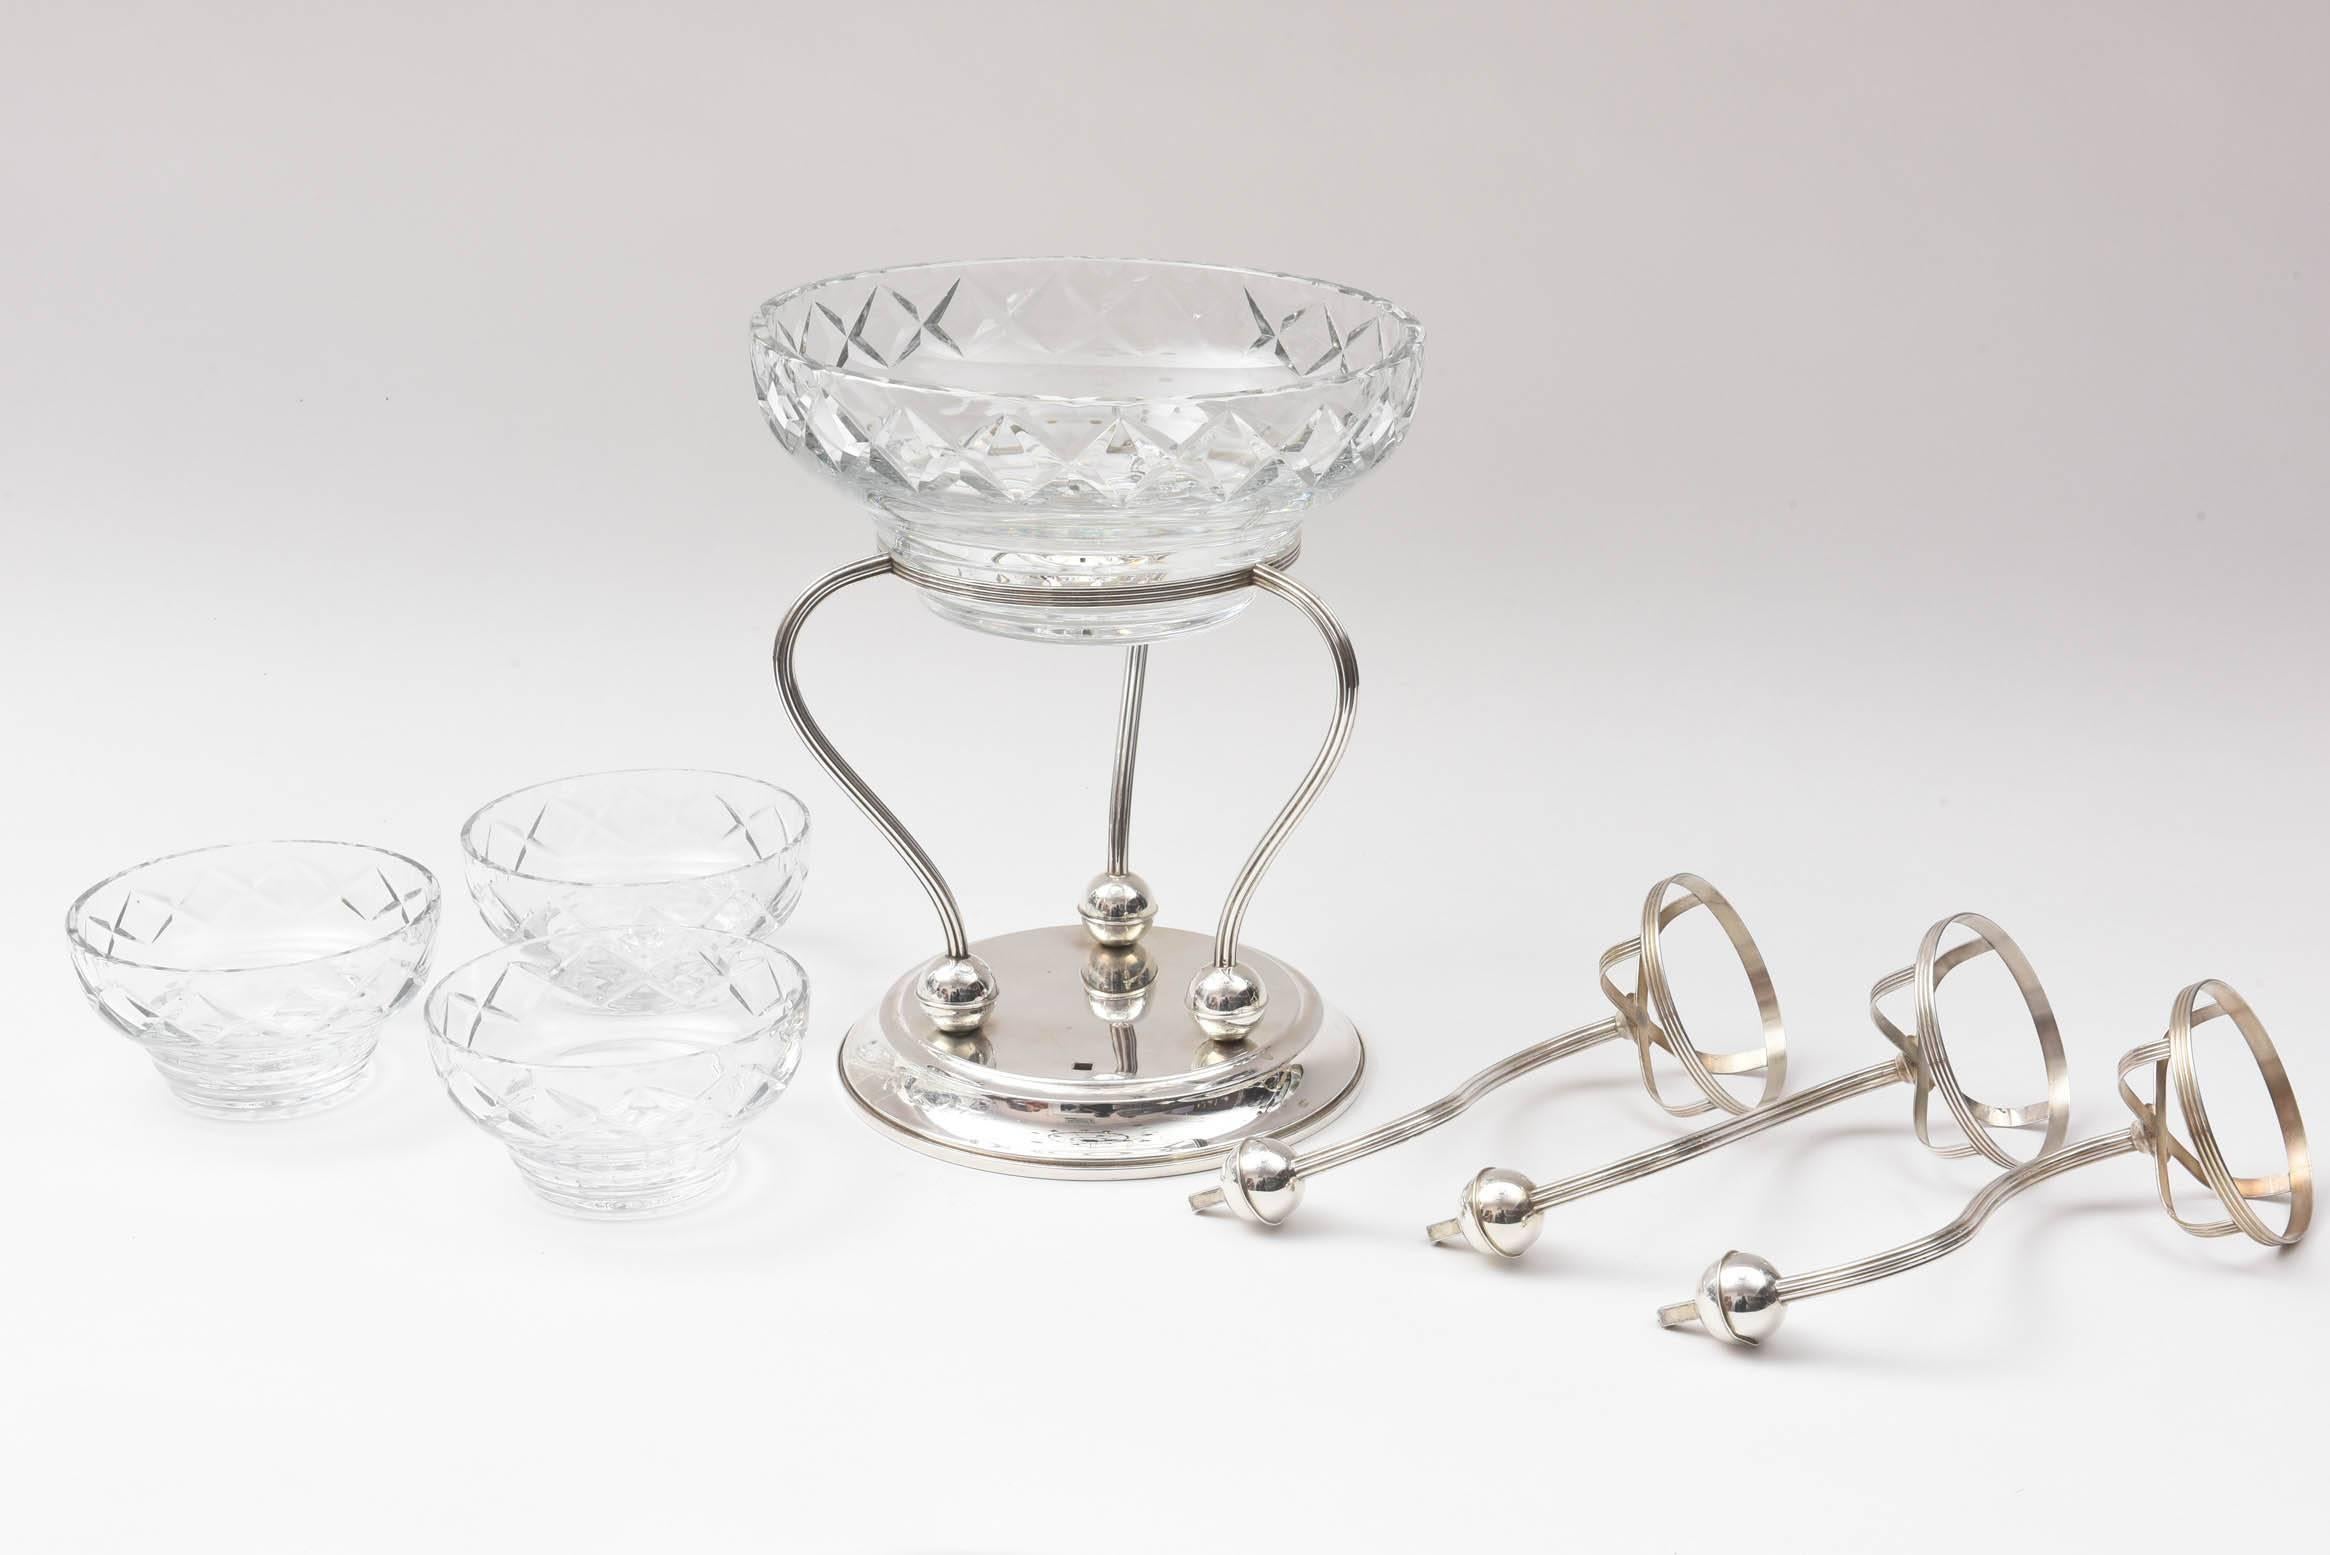 Mid-20th Century Sterling and Cut Crystal Centrepiece or Epergne, Three-Arm with Centre Bowl